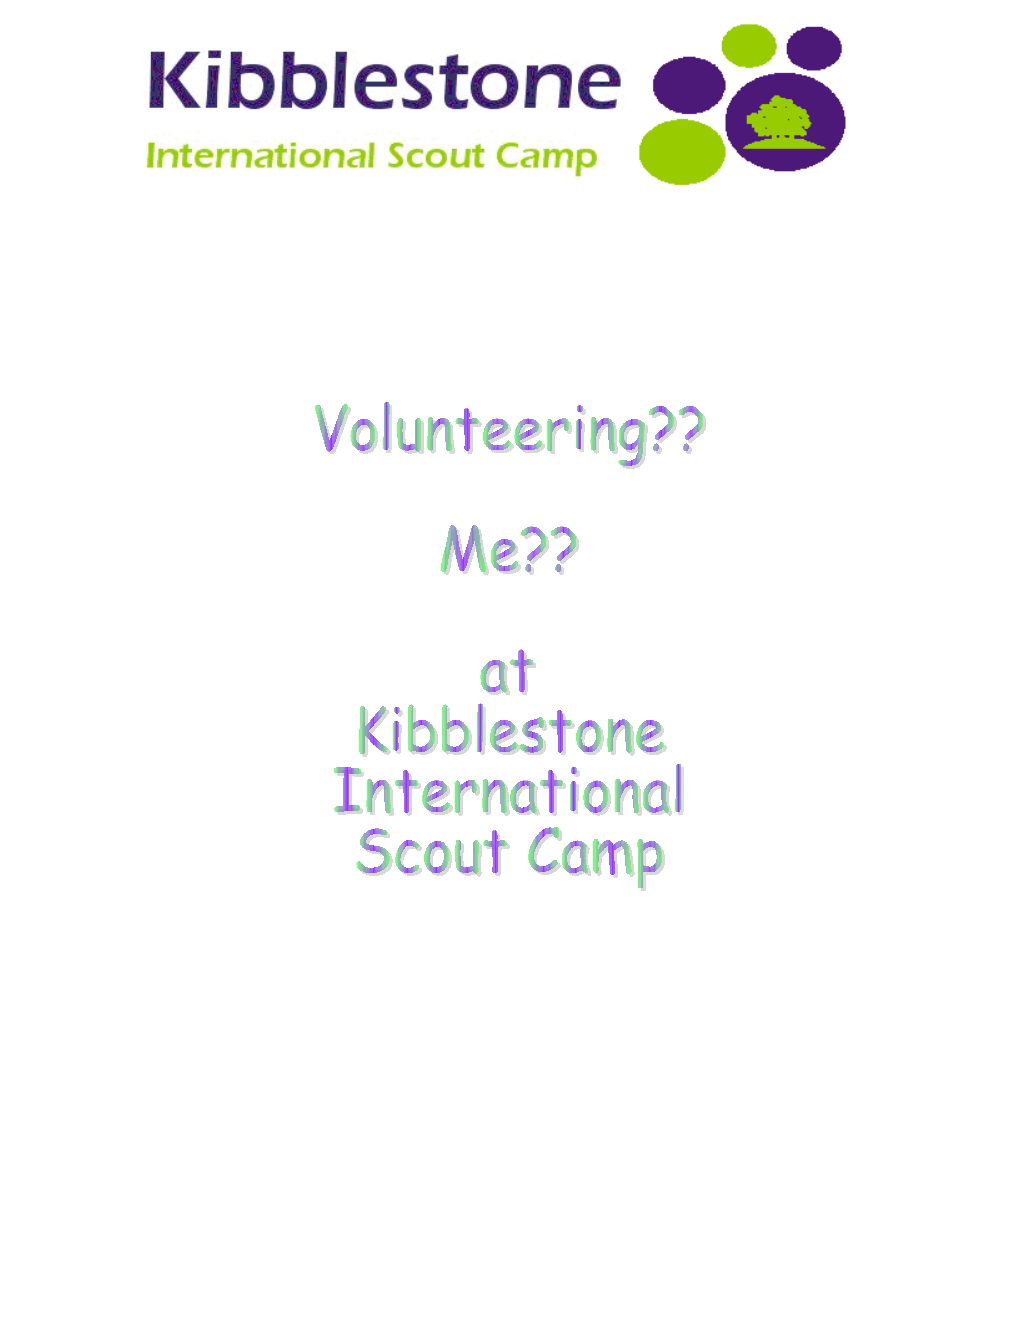 Kibblestone International Scout Camp Welcomes Volunteer and the Contributions That They